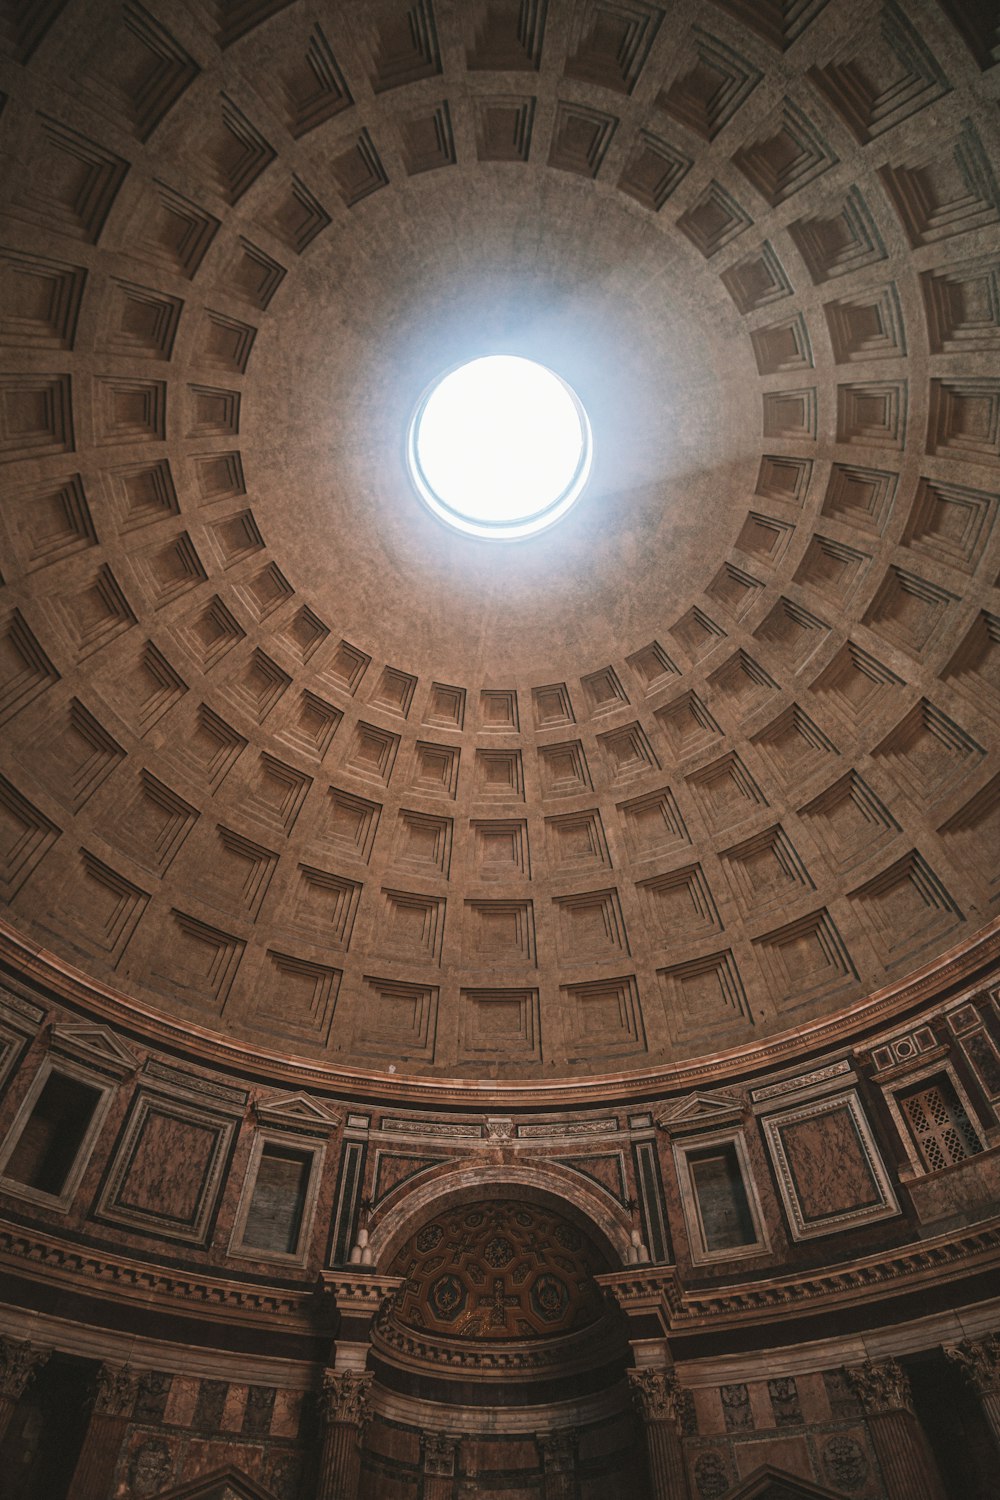 inside Pantheon temple in Rome Italy